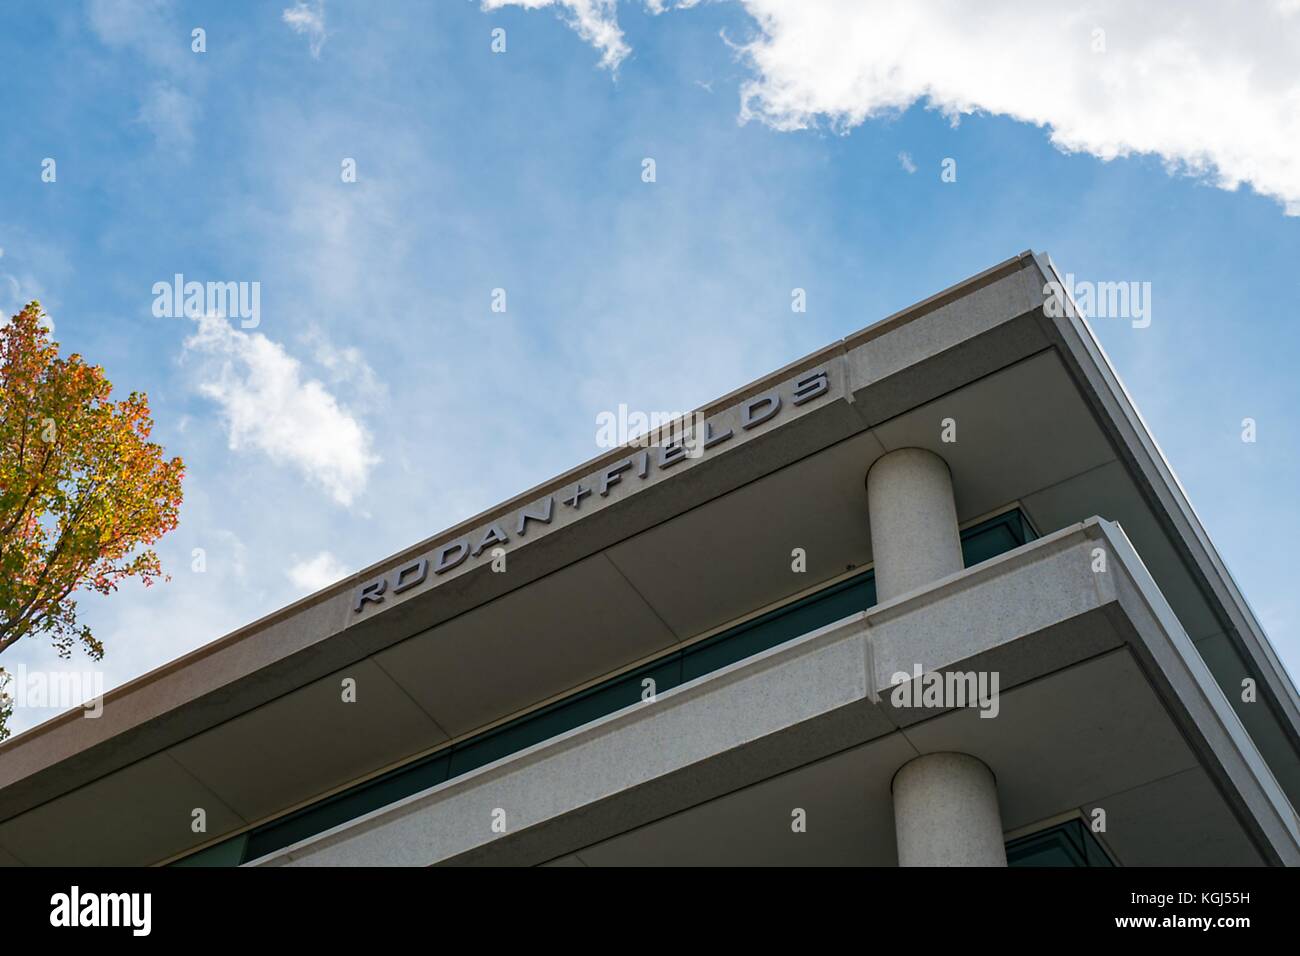 Sign on facade of office of skincare products manufacturing company Rodan and Fields in the Bishop Ranch office park in San Ramon, California, October 20, 2017. () Stock Photo